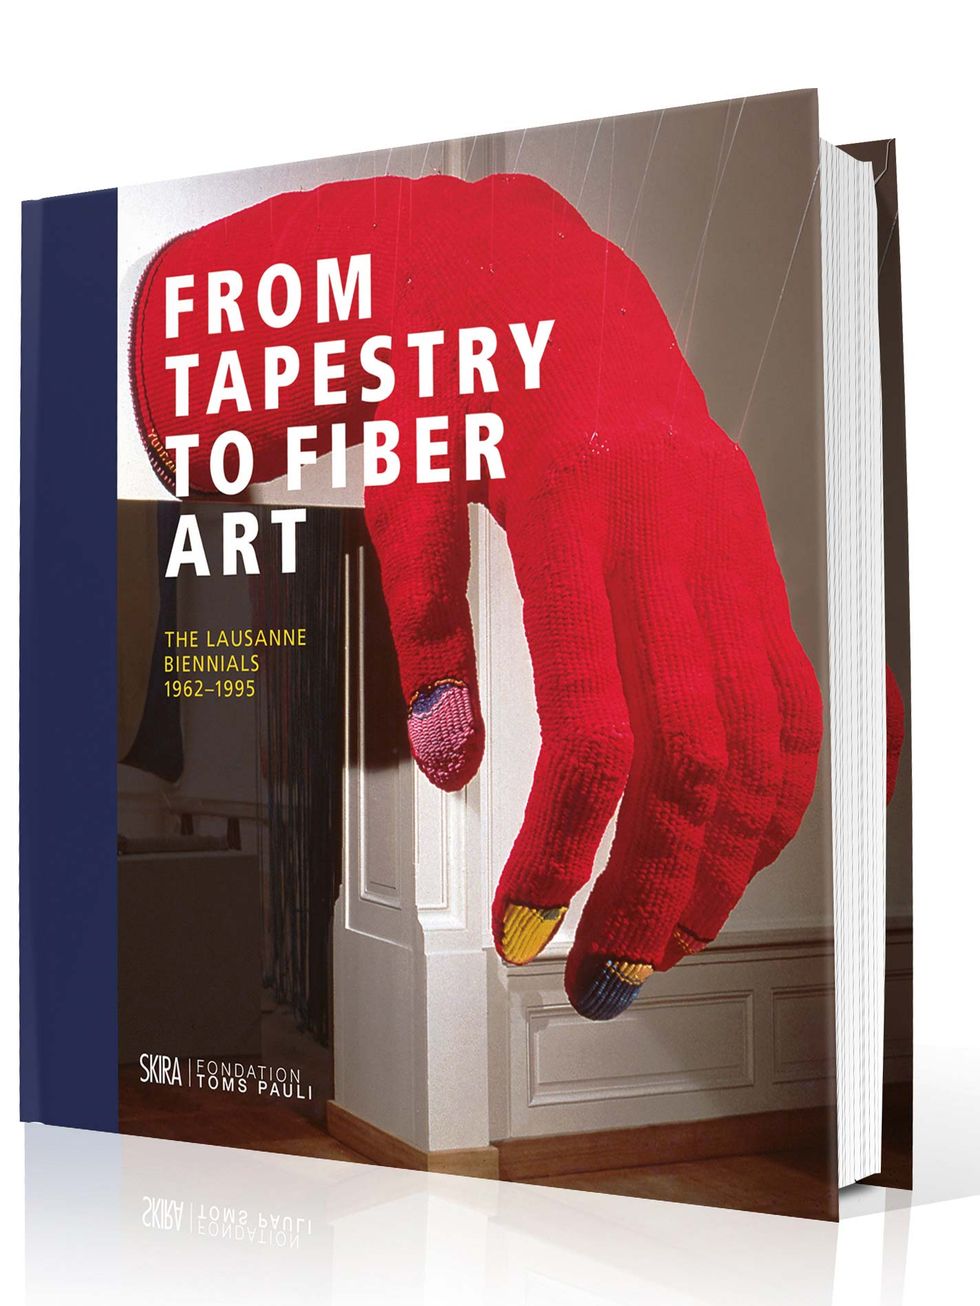 Libro: From tapestry to fiber art